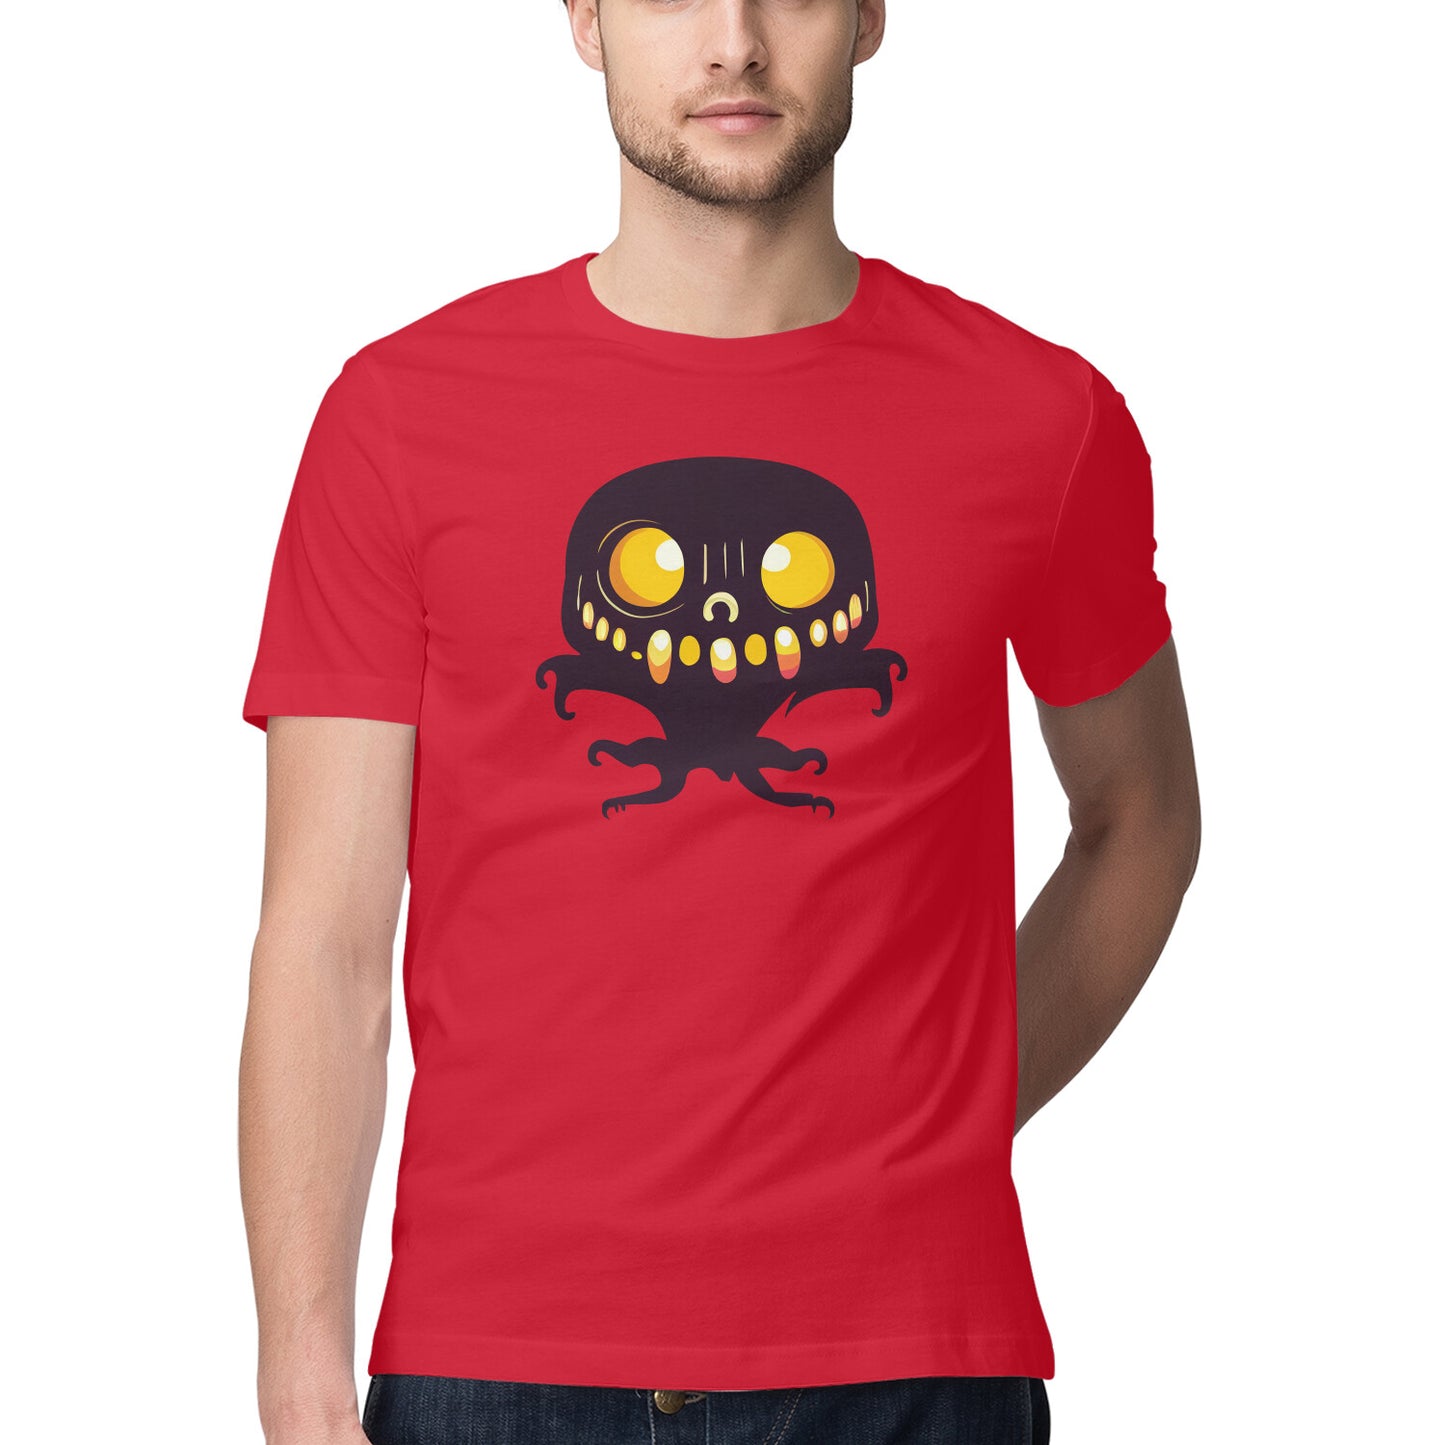 Zombies and monsters Design 19 Printed Graphic T-Shirt